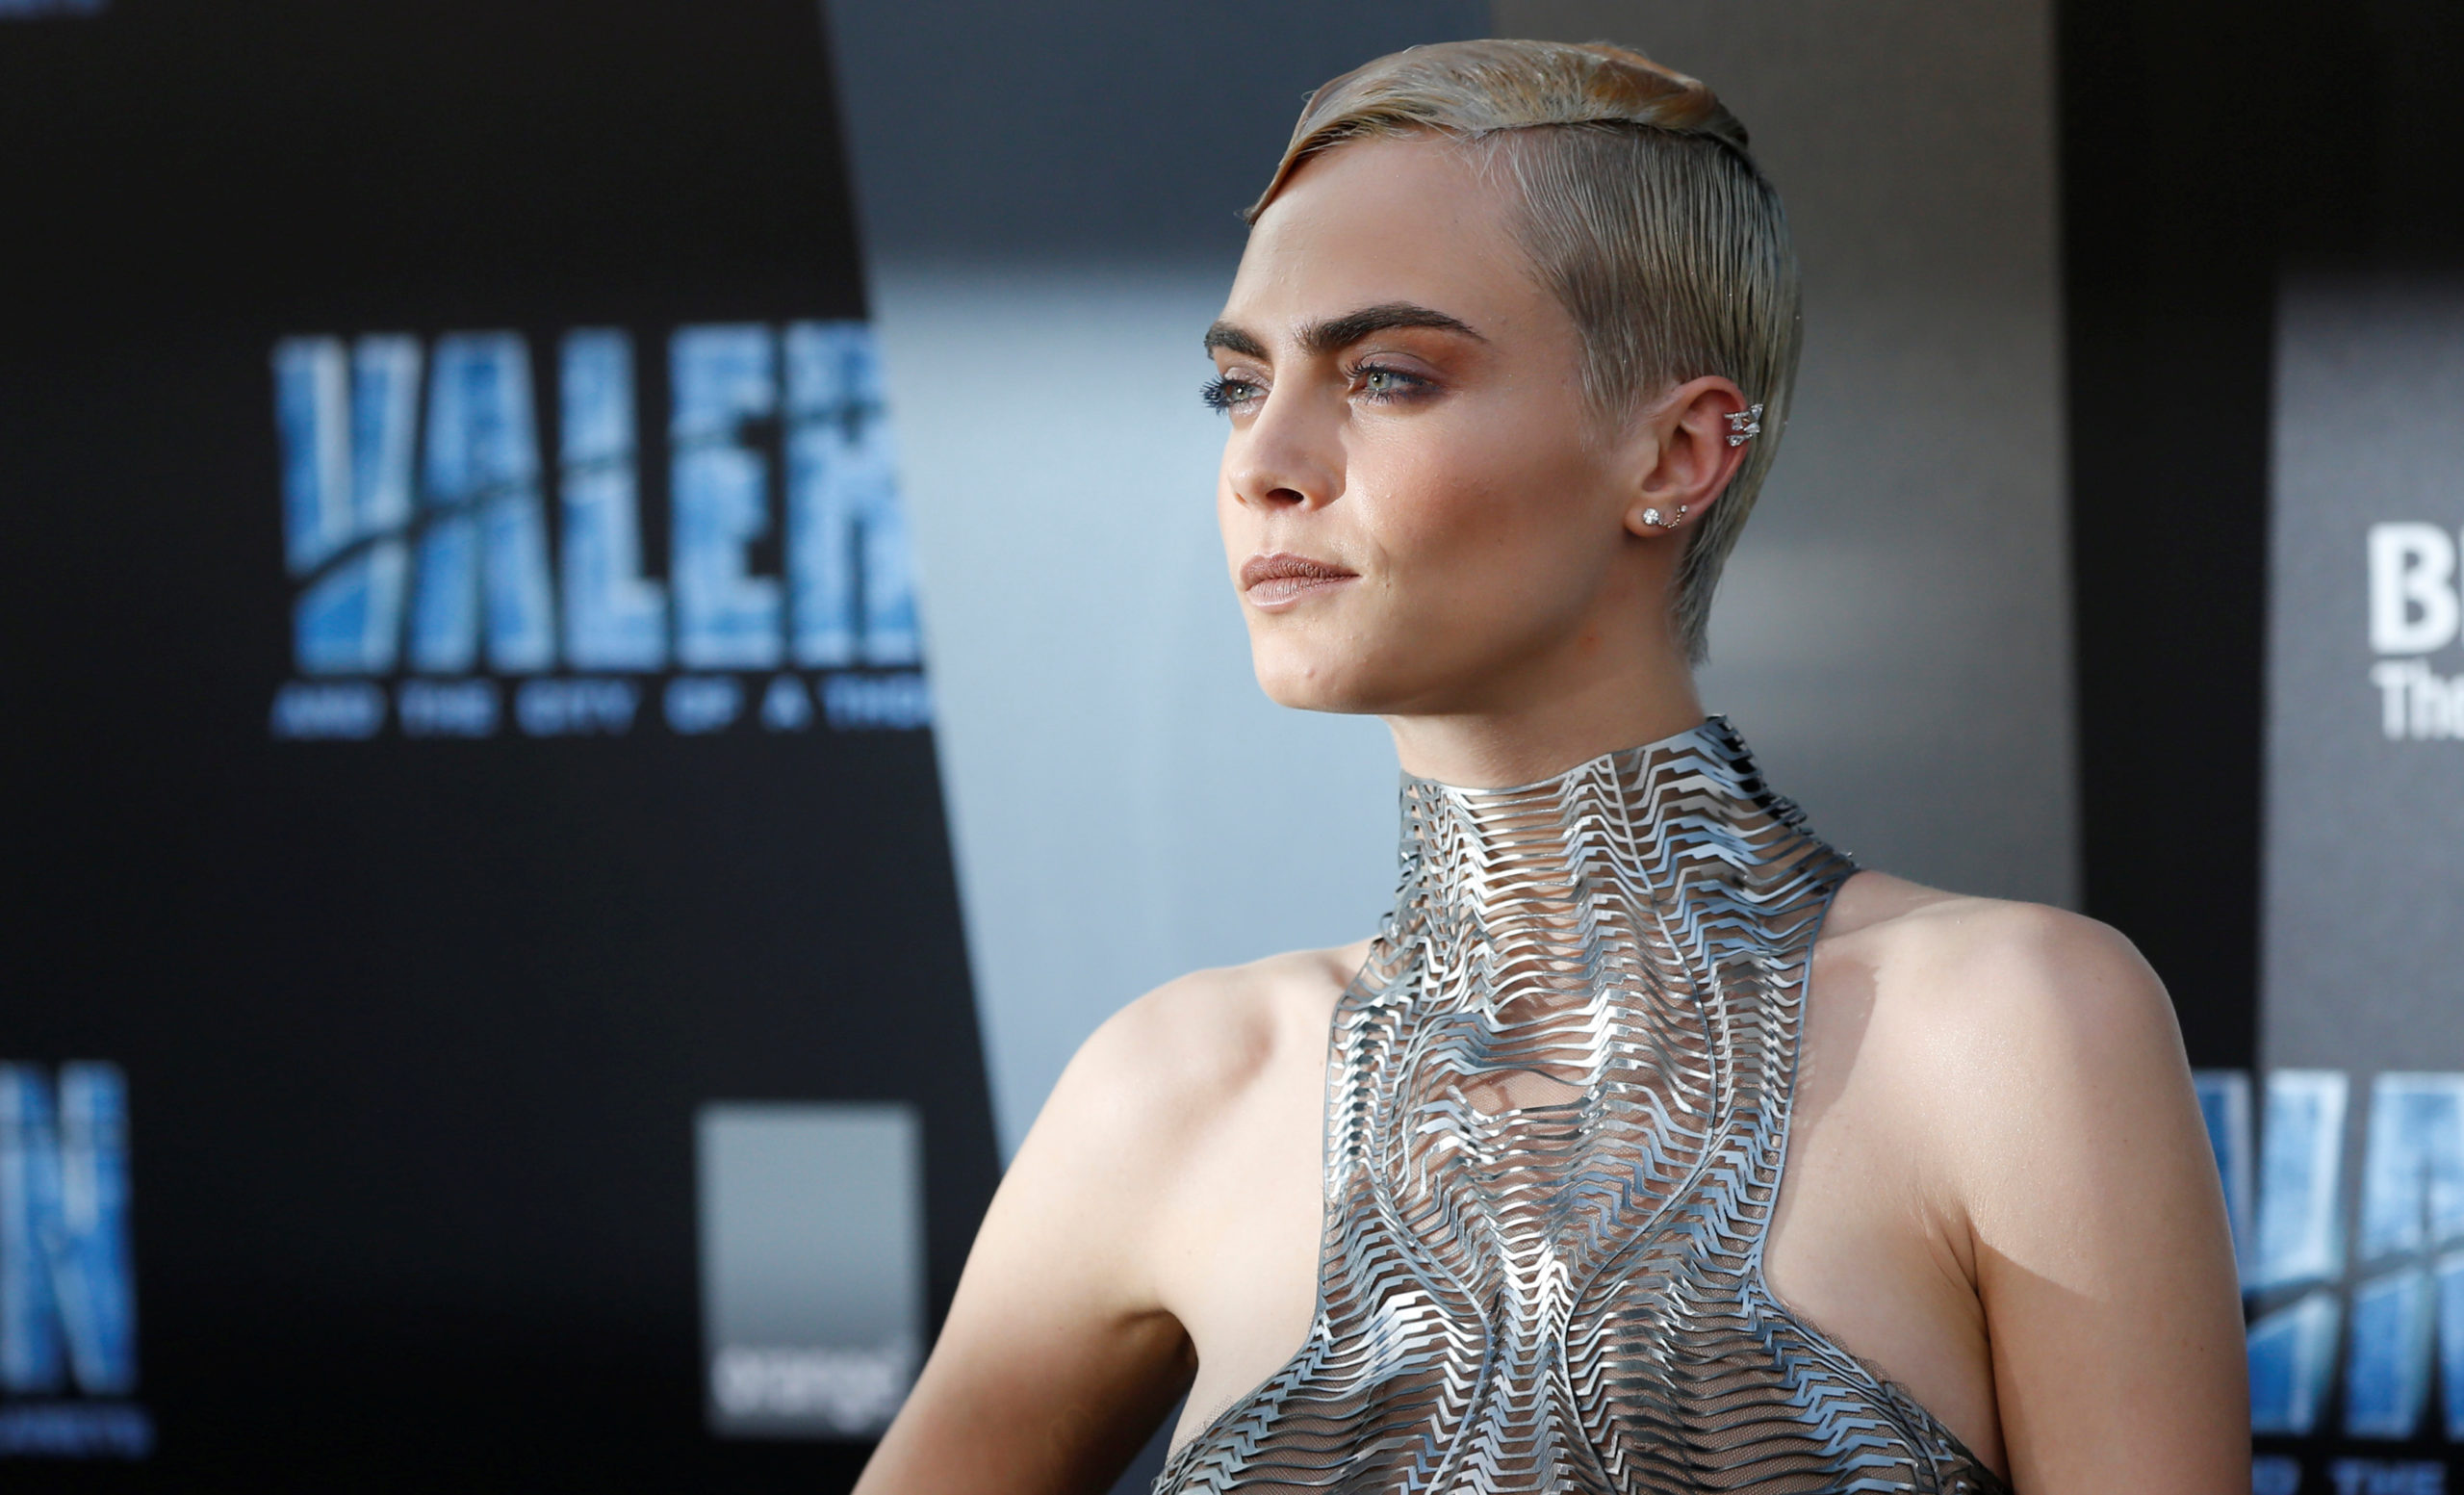 Cast member Cara Delevingne poses at the premiere for "Valerian and the City of a Thousand Planets" in Los Angeles, California, U.S., July 17, 2017. Picture taken July 17, 2017. REUTERS/Mario Anzuoni